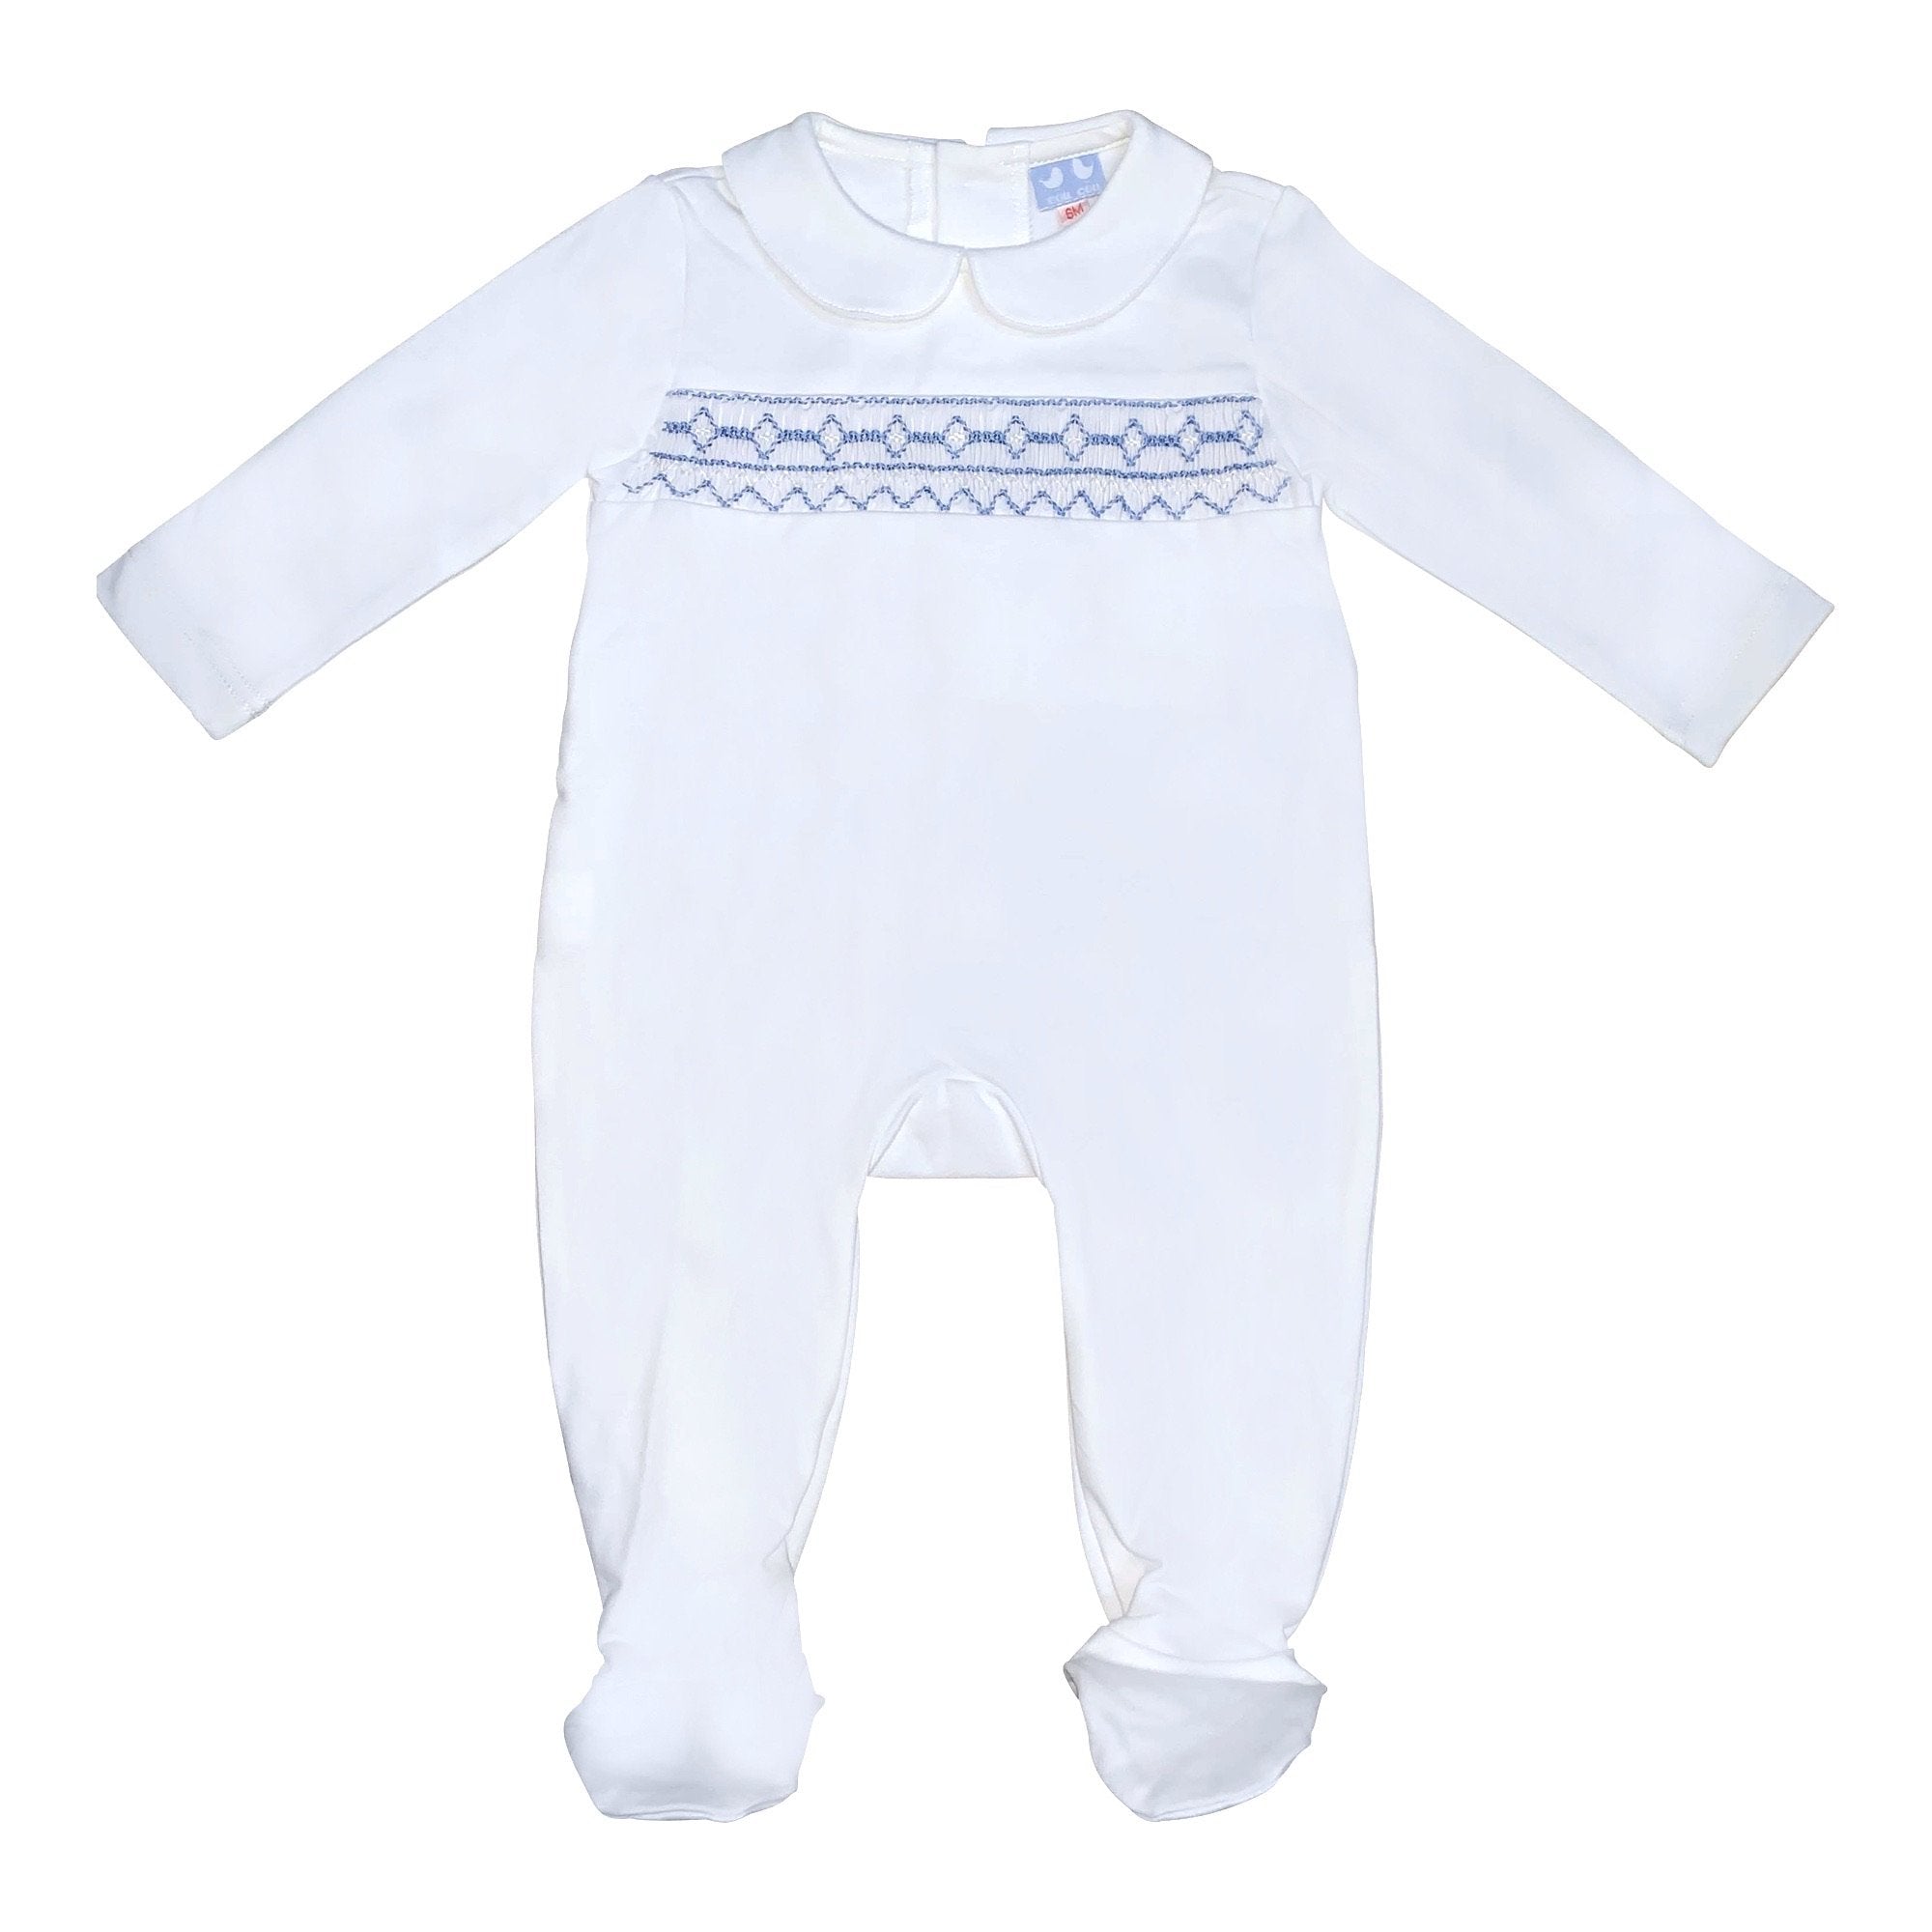 Boys Stretch Cotton Smocked Romper - Cou Cou Baby